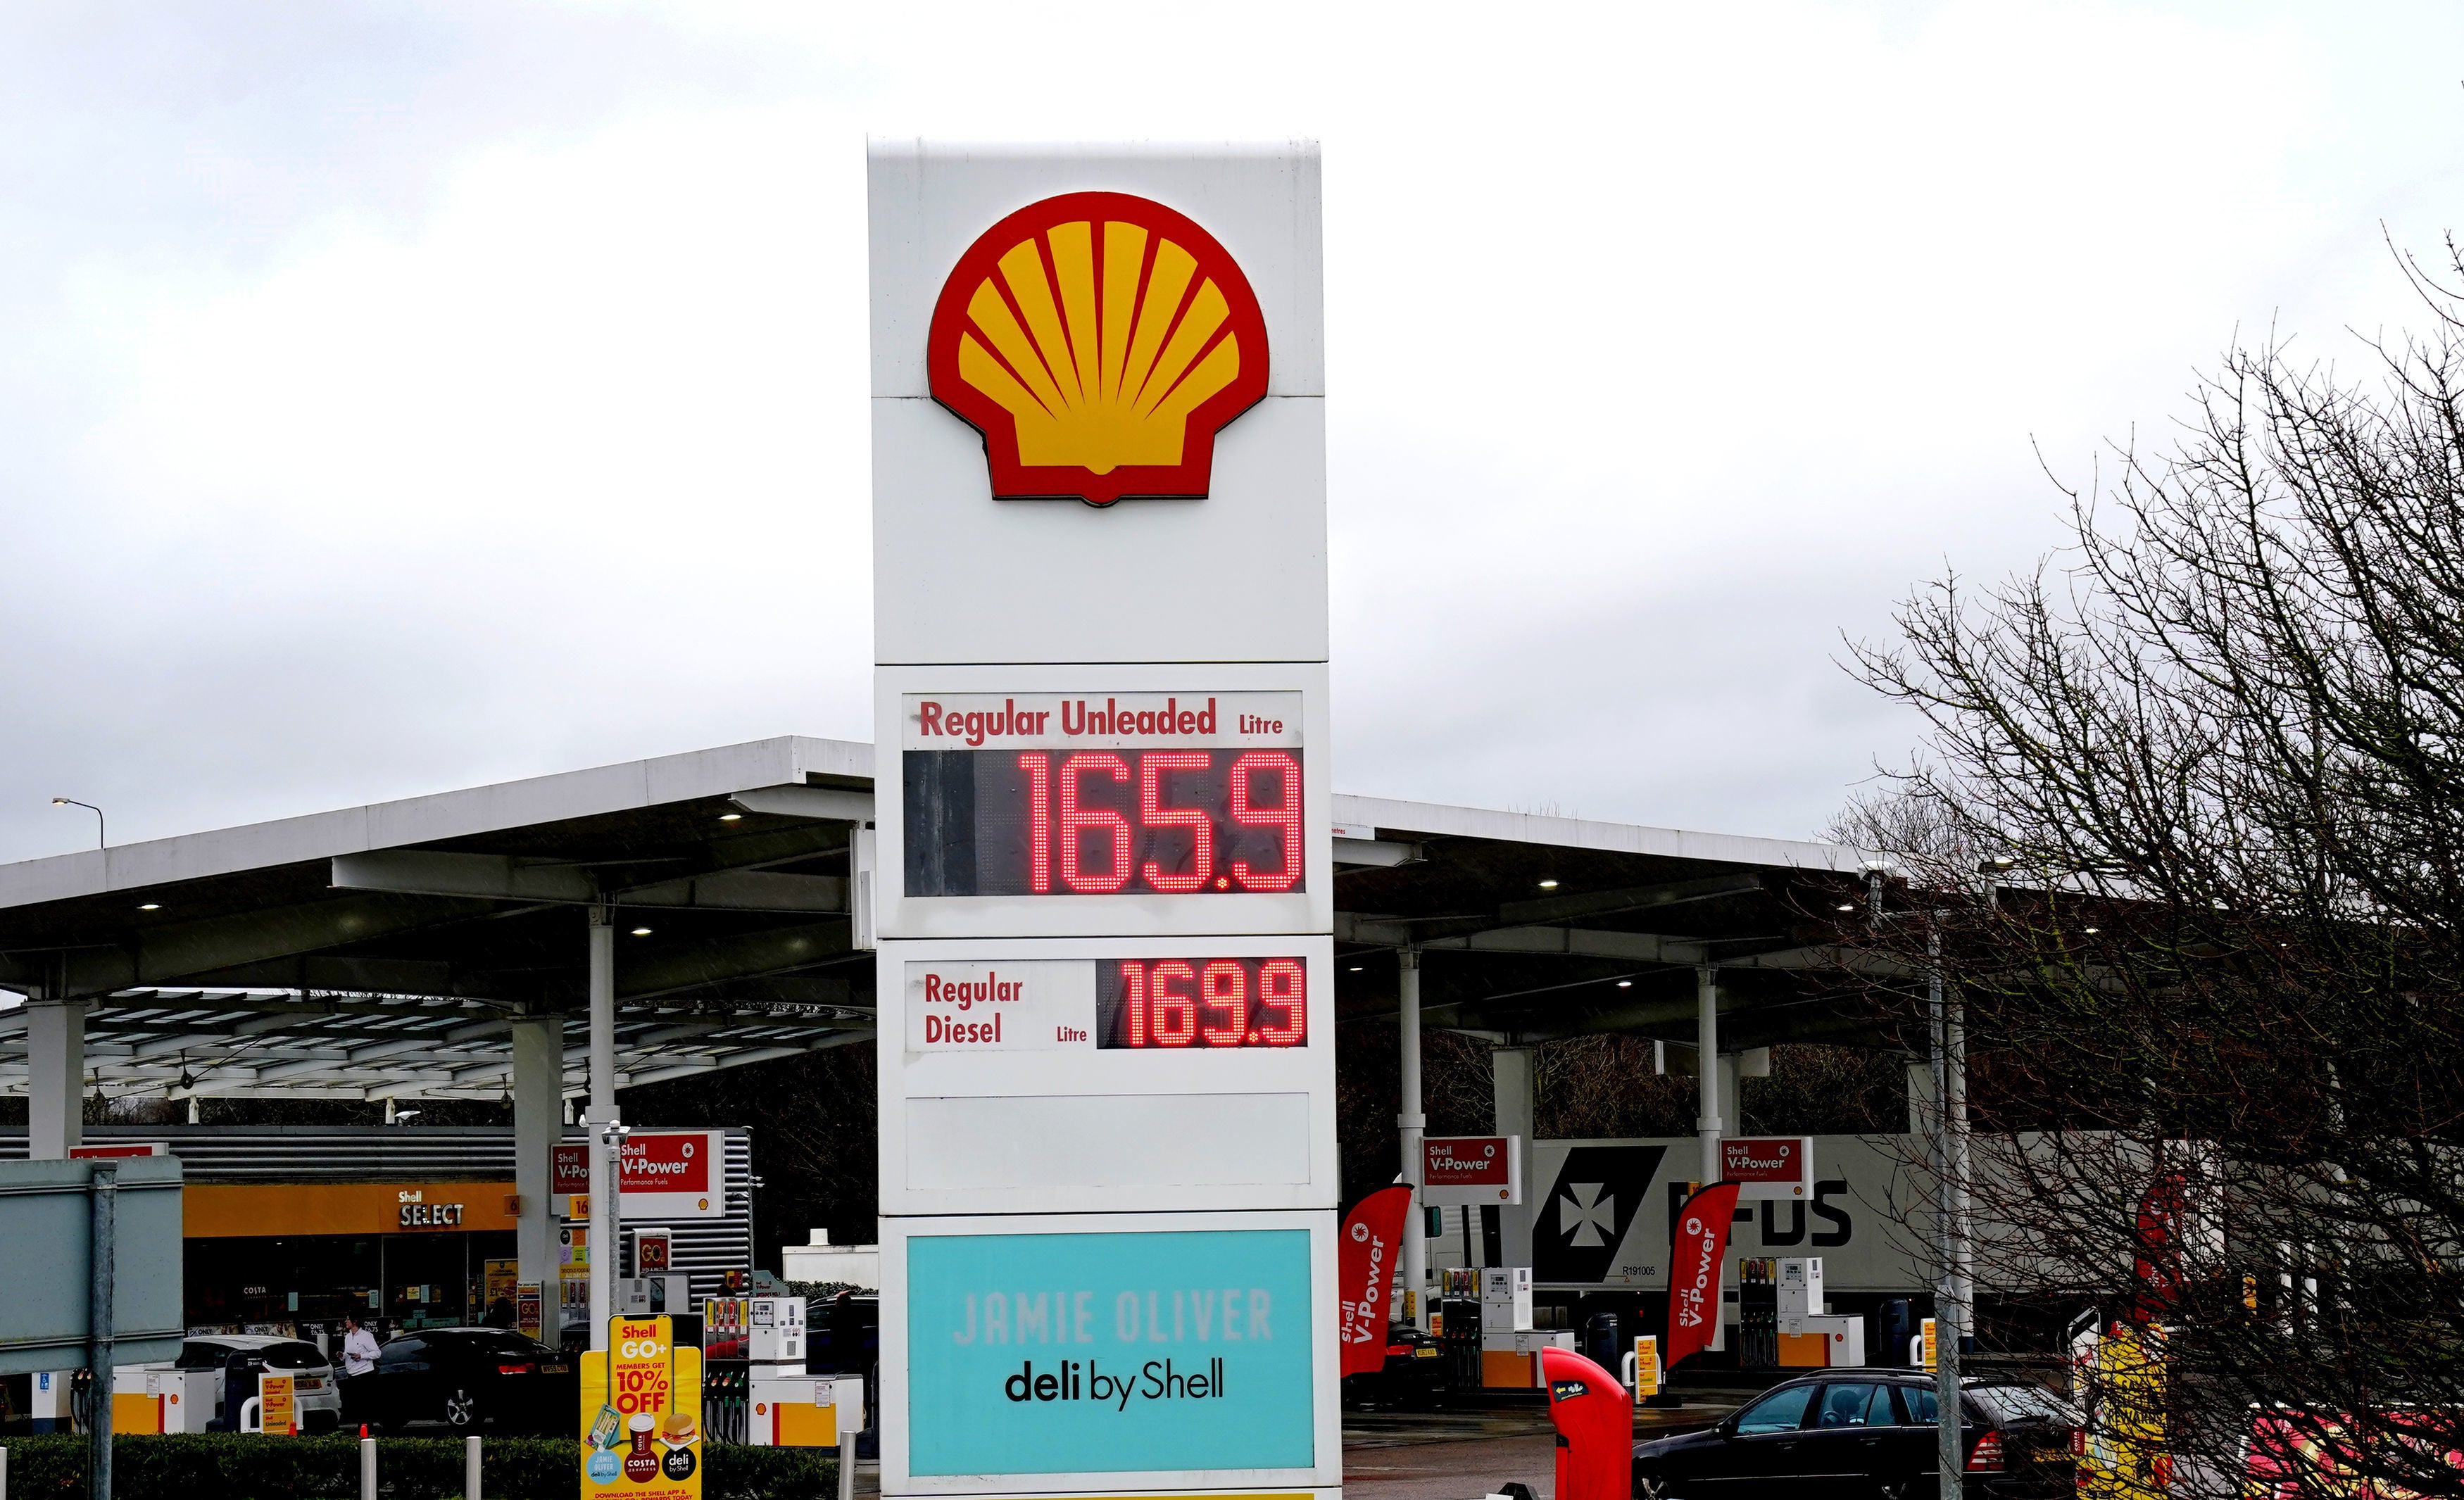 Petrol Retailers Association said the figure were not accurate